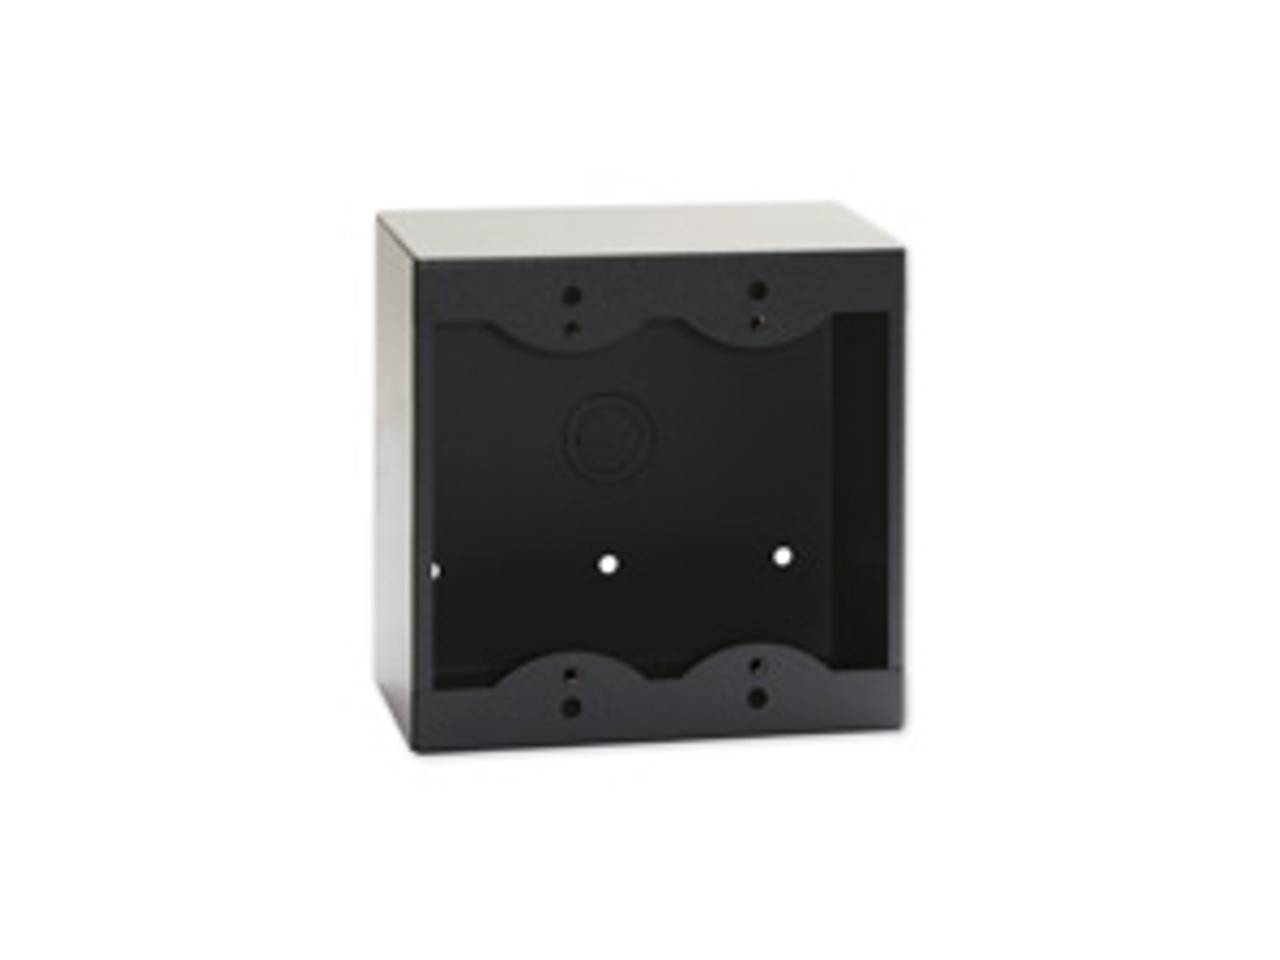 RDL SMB-2 Surface Mount Boxes for Decora® Remote Controls and Panels (SMB-2)